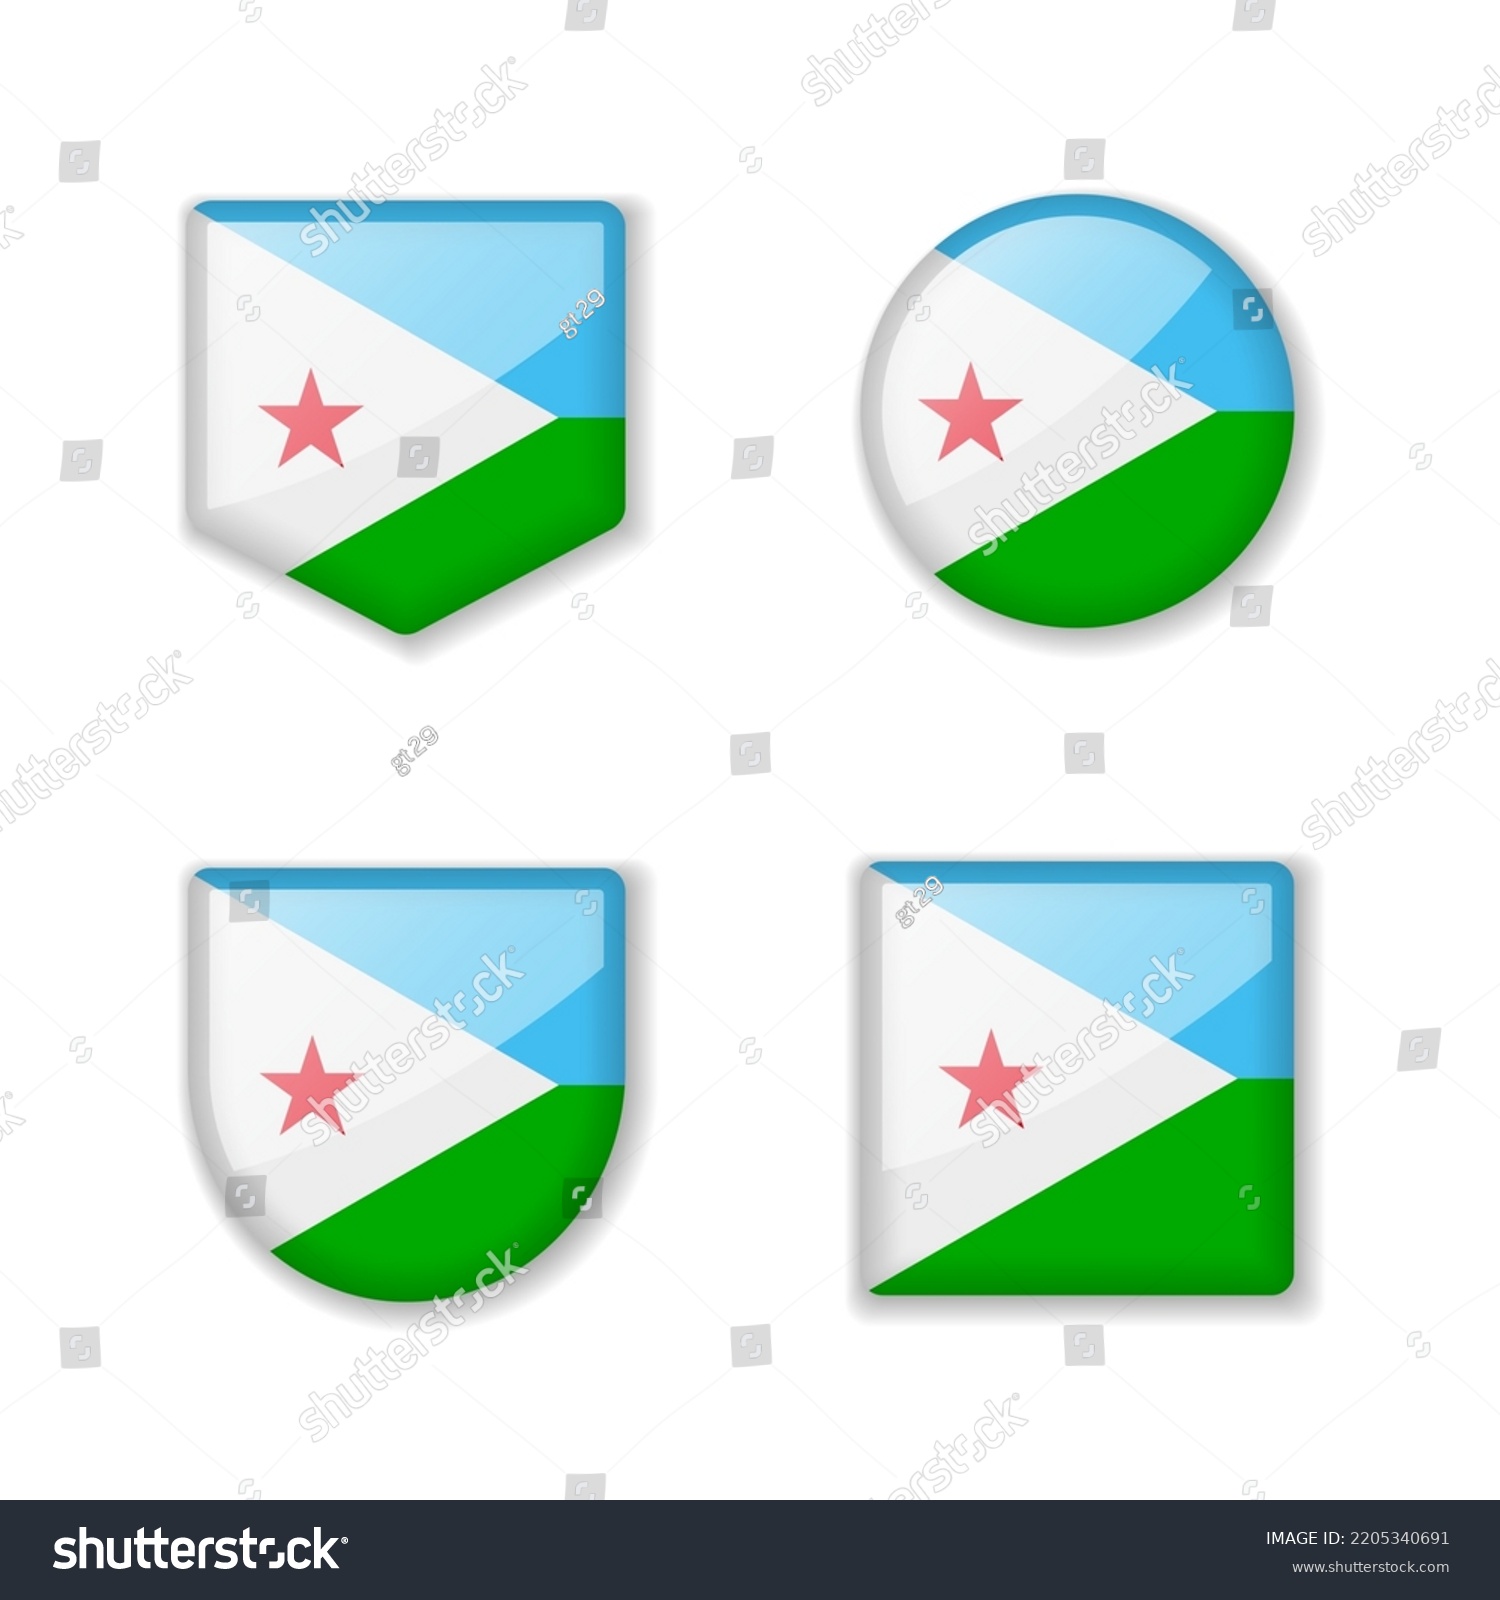 SVG of Flags of Djibouti - glossy collection. Set of vector illustrations svg